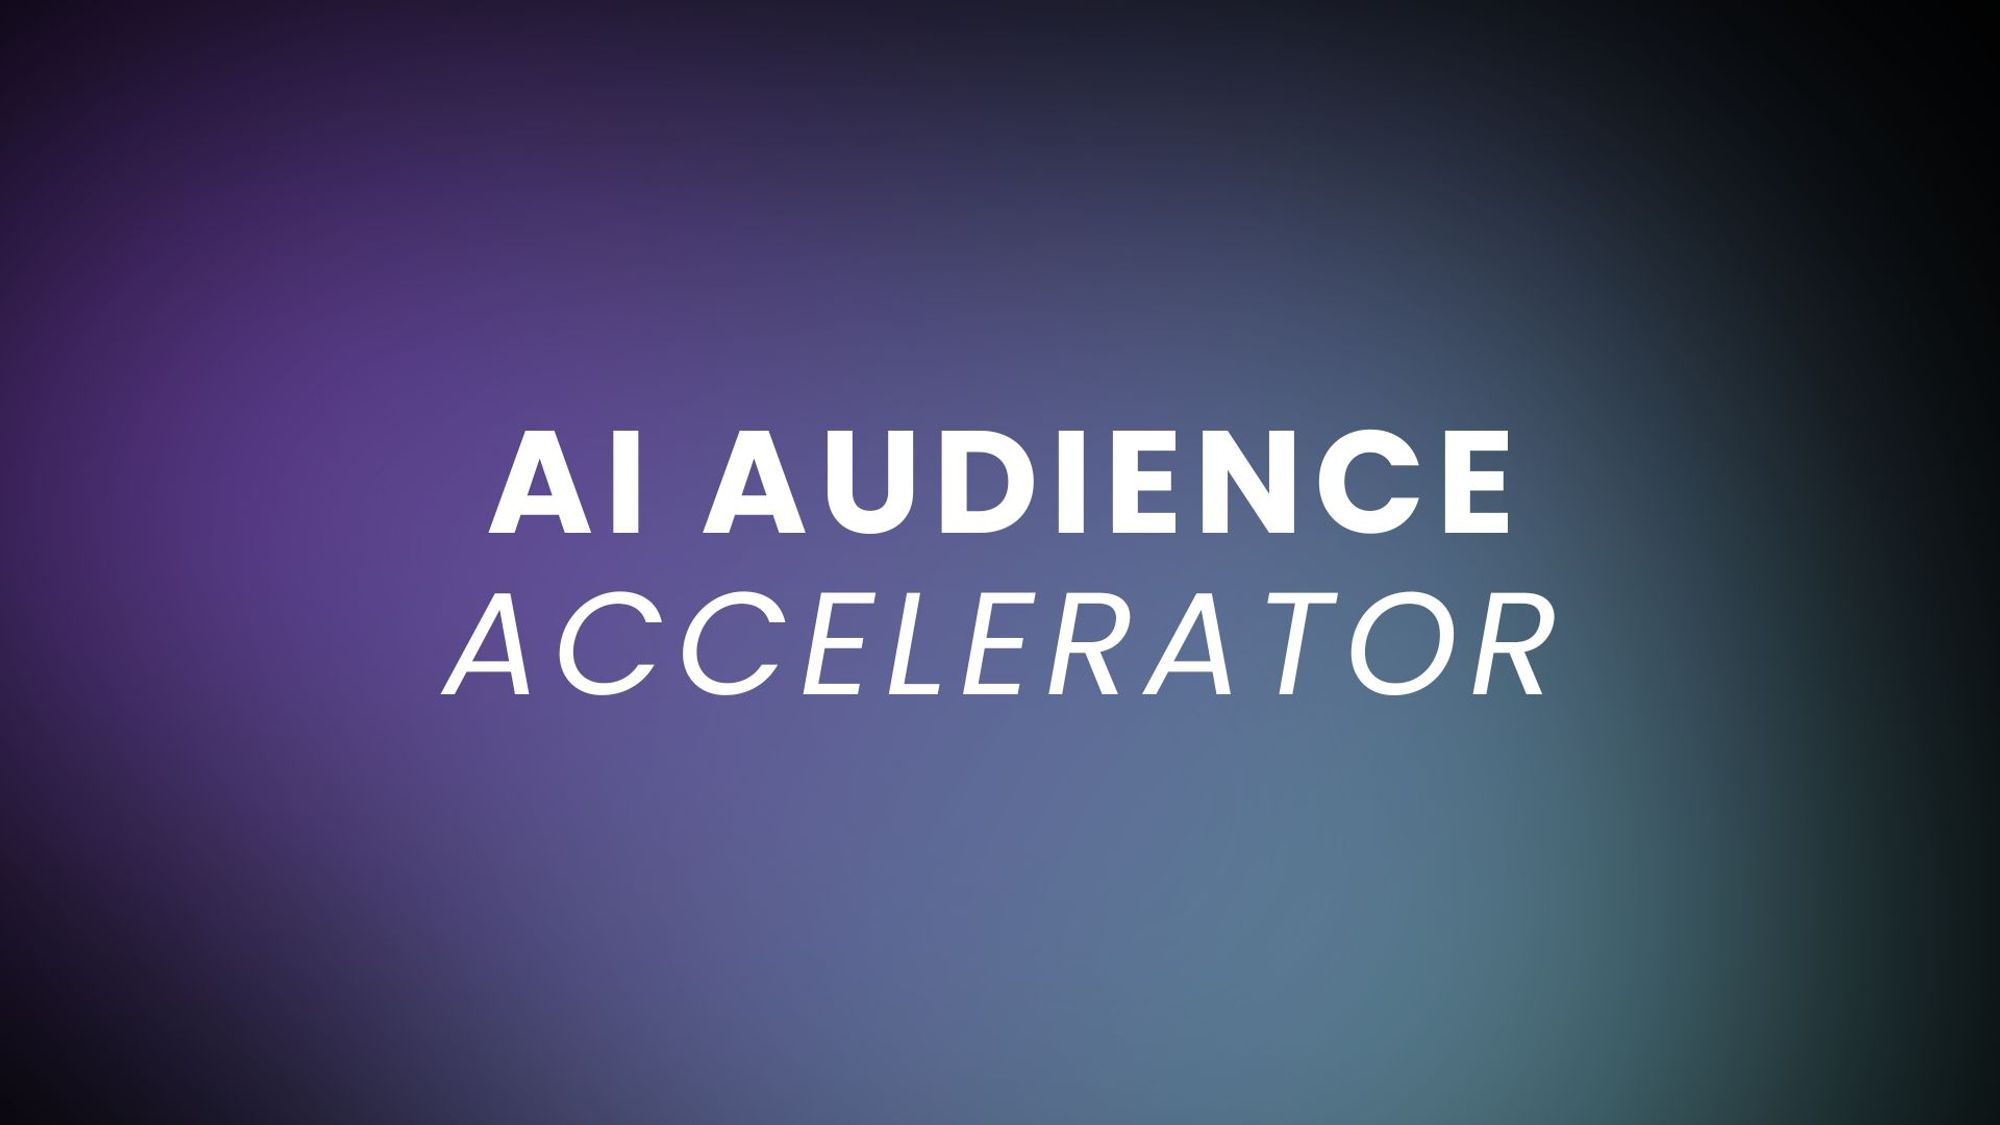 You are currently viewing Ole Lehmann – AI Audience Accelerator